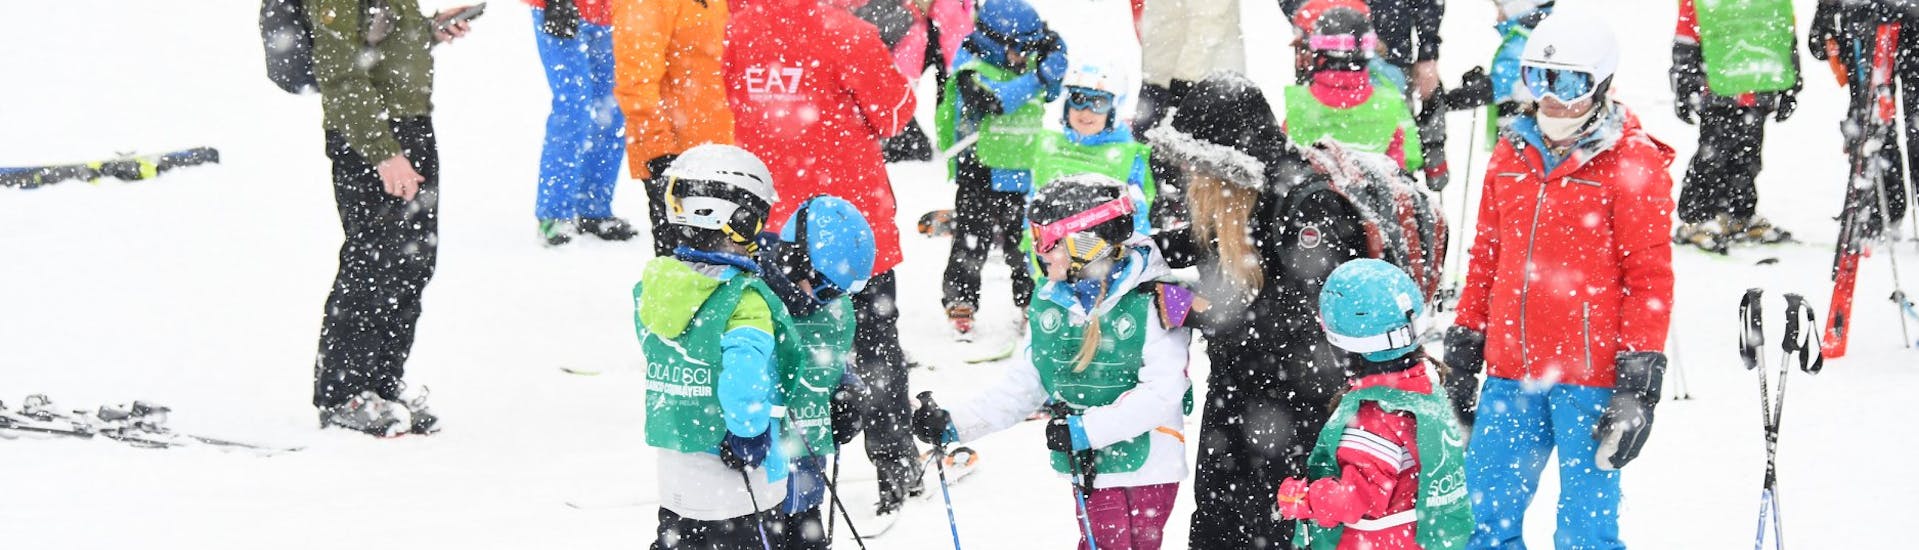 Some kids are getting ready for their descent during the Kids Ski Lessons (4-12 y.) for Advanced with Scuola di Sci Monte Bianco Courmayeur.